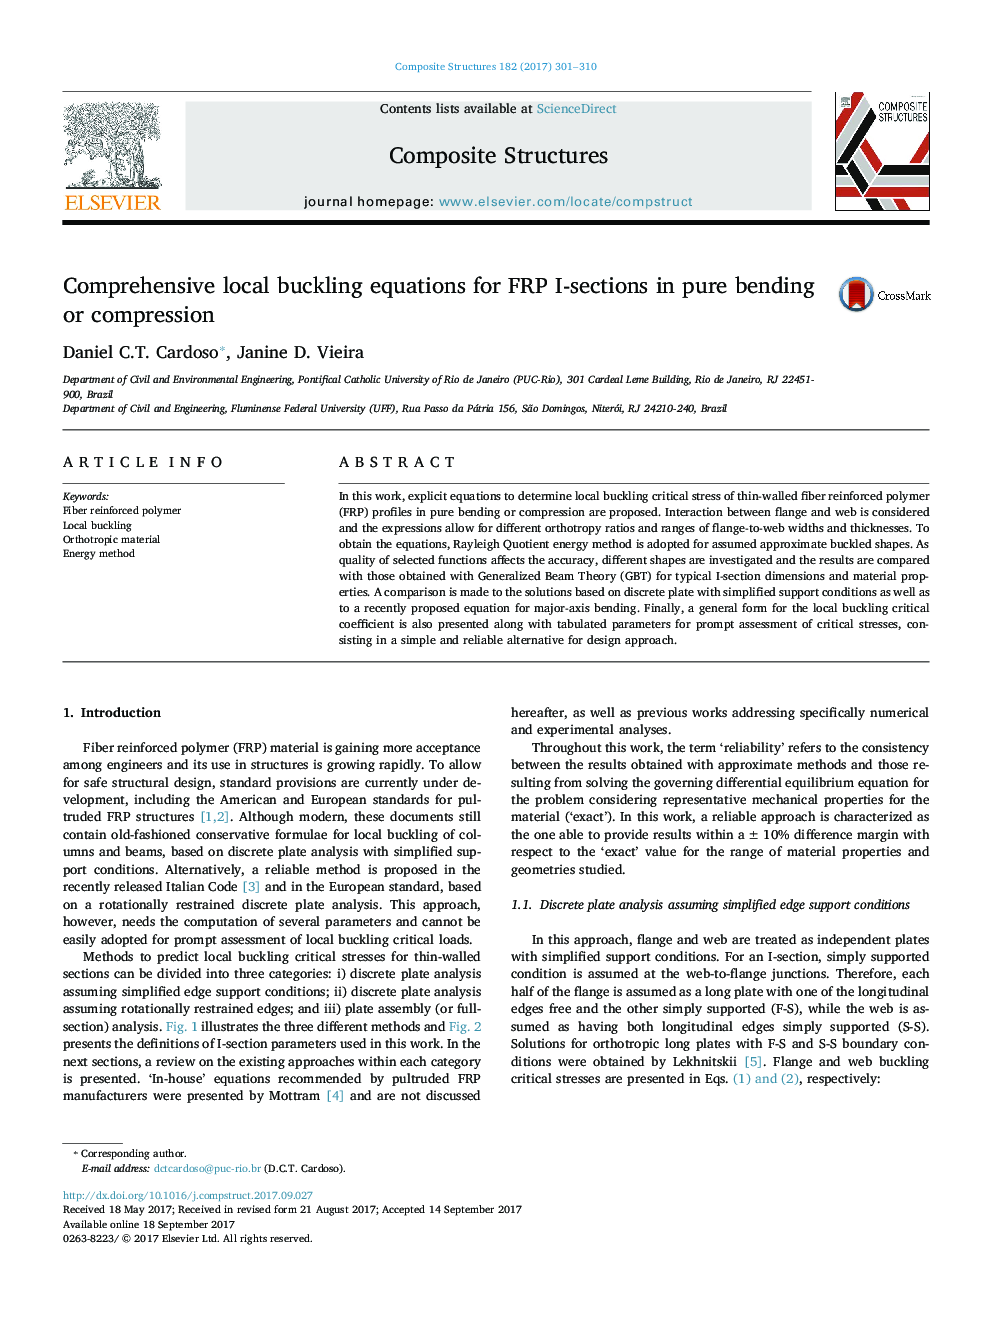 Comprehensive local buckling equations for FRP I-sections in pure bending or compression